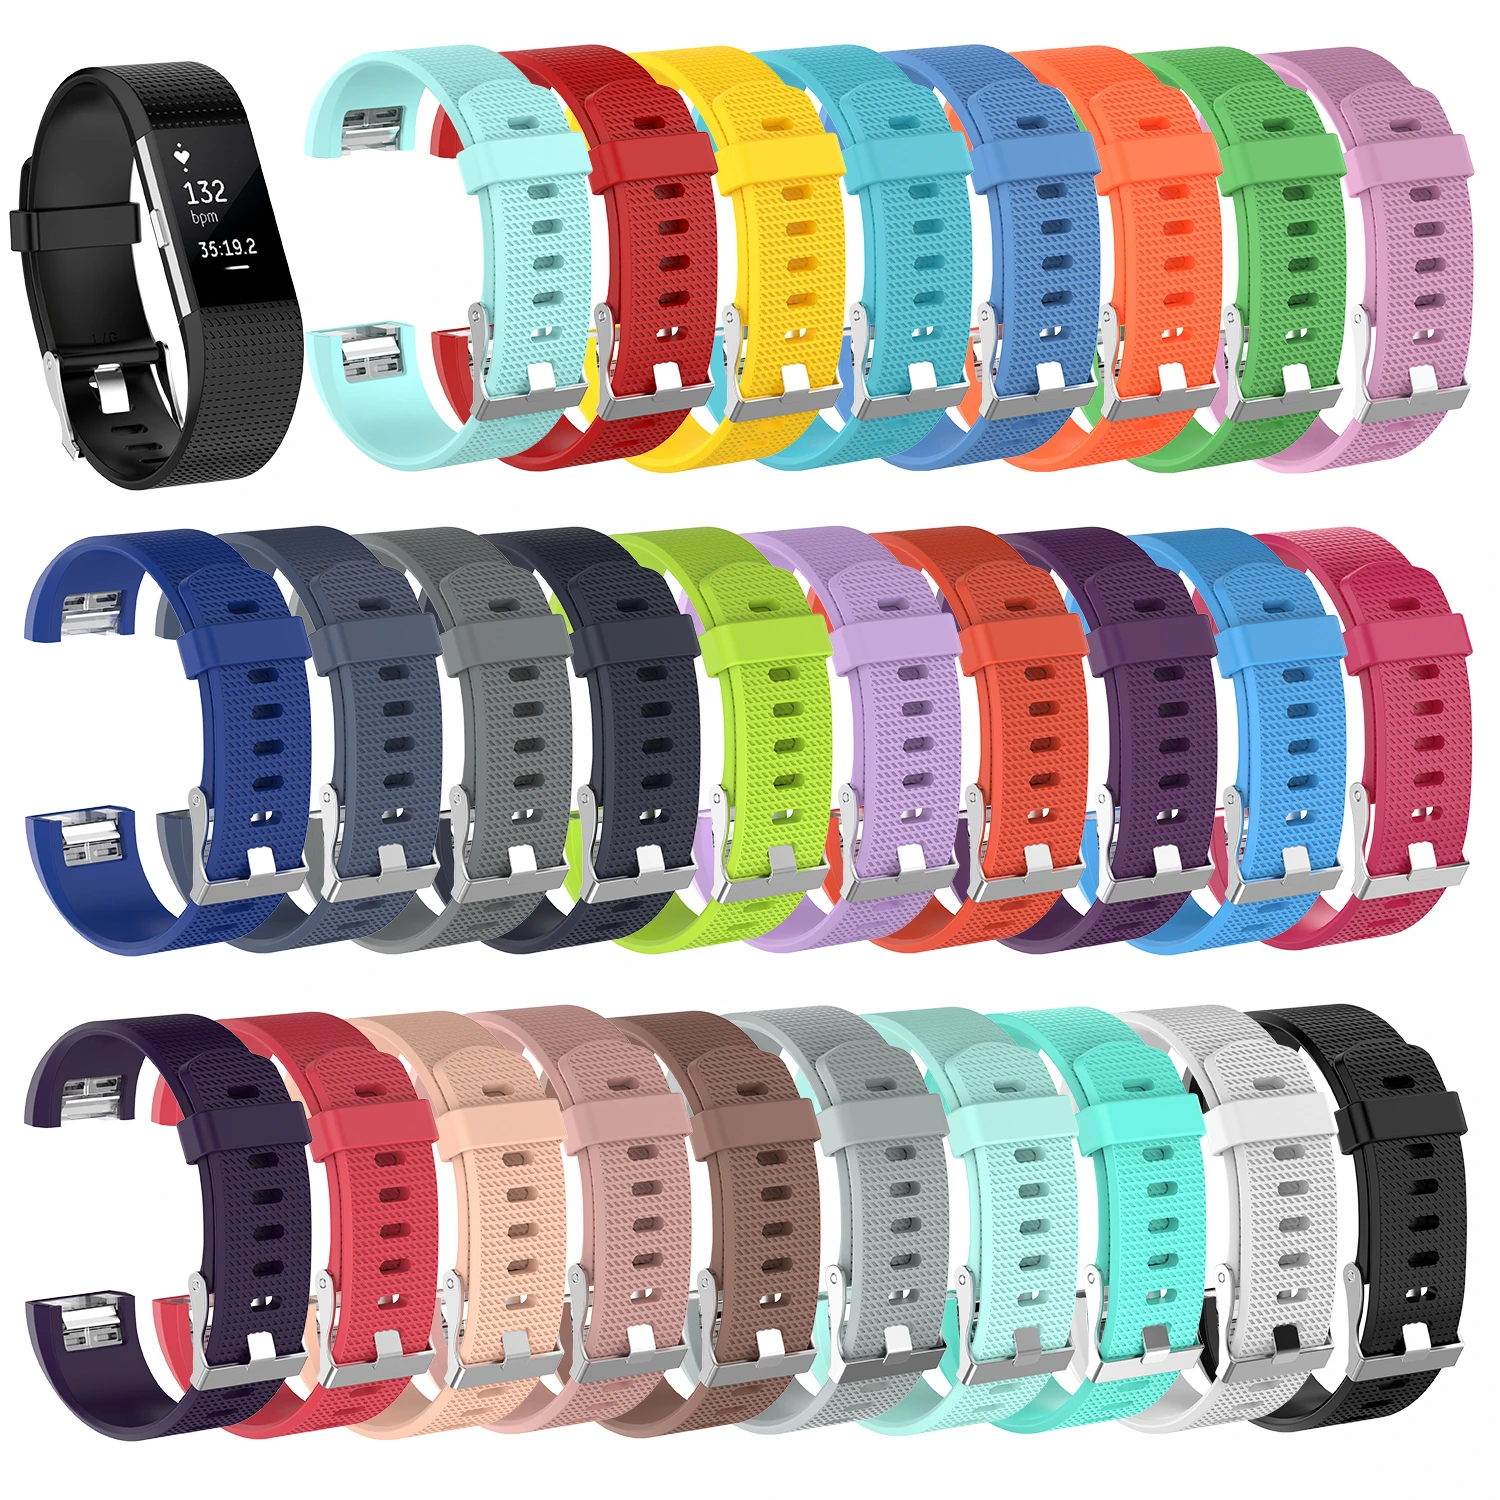 Fitbit Charge 2 Metal Wrist Strap Band Belt Buckle Accessories Replacement Parts 